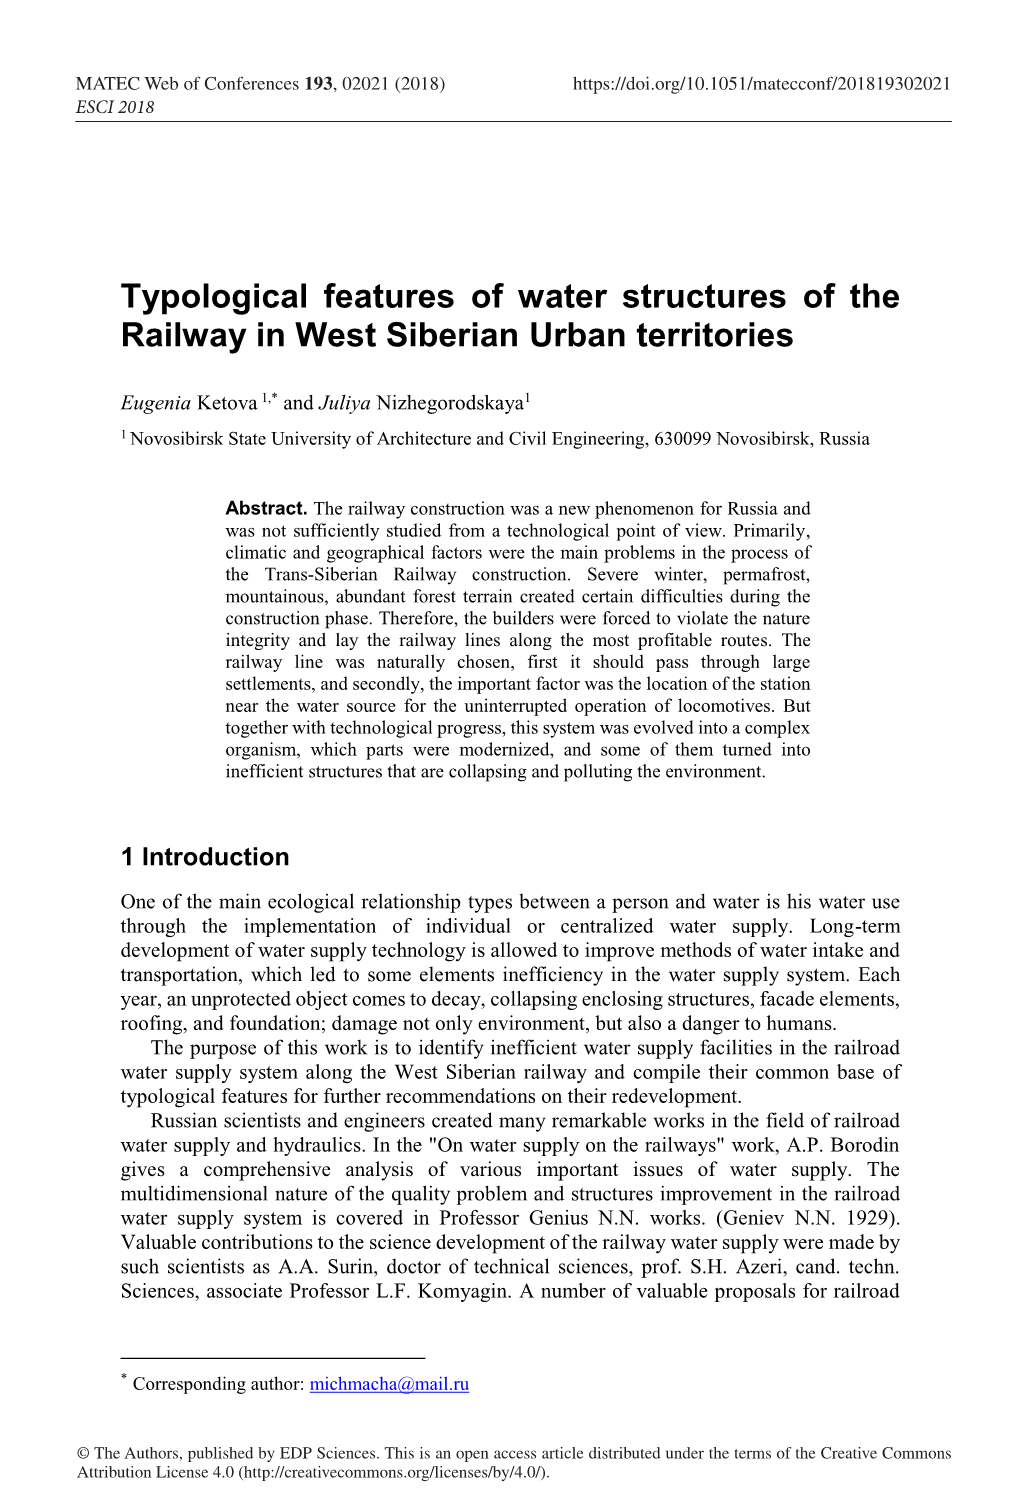 Typological Features of Water Structures of the Railway in West Siberian Urban Territories